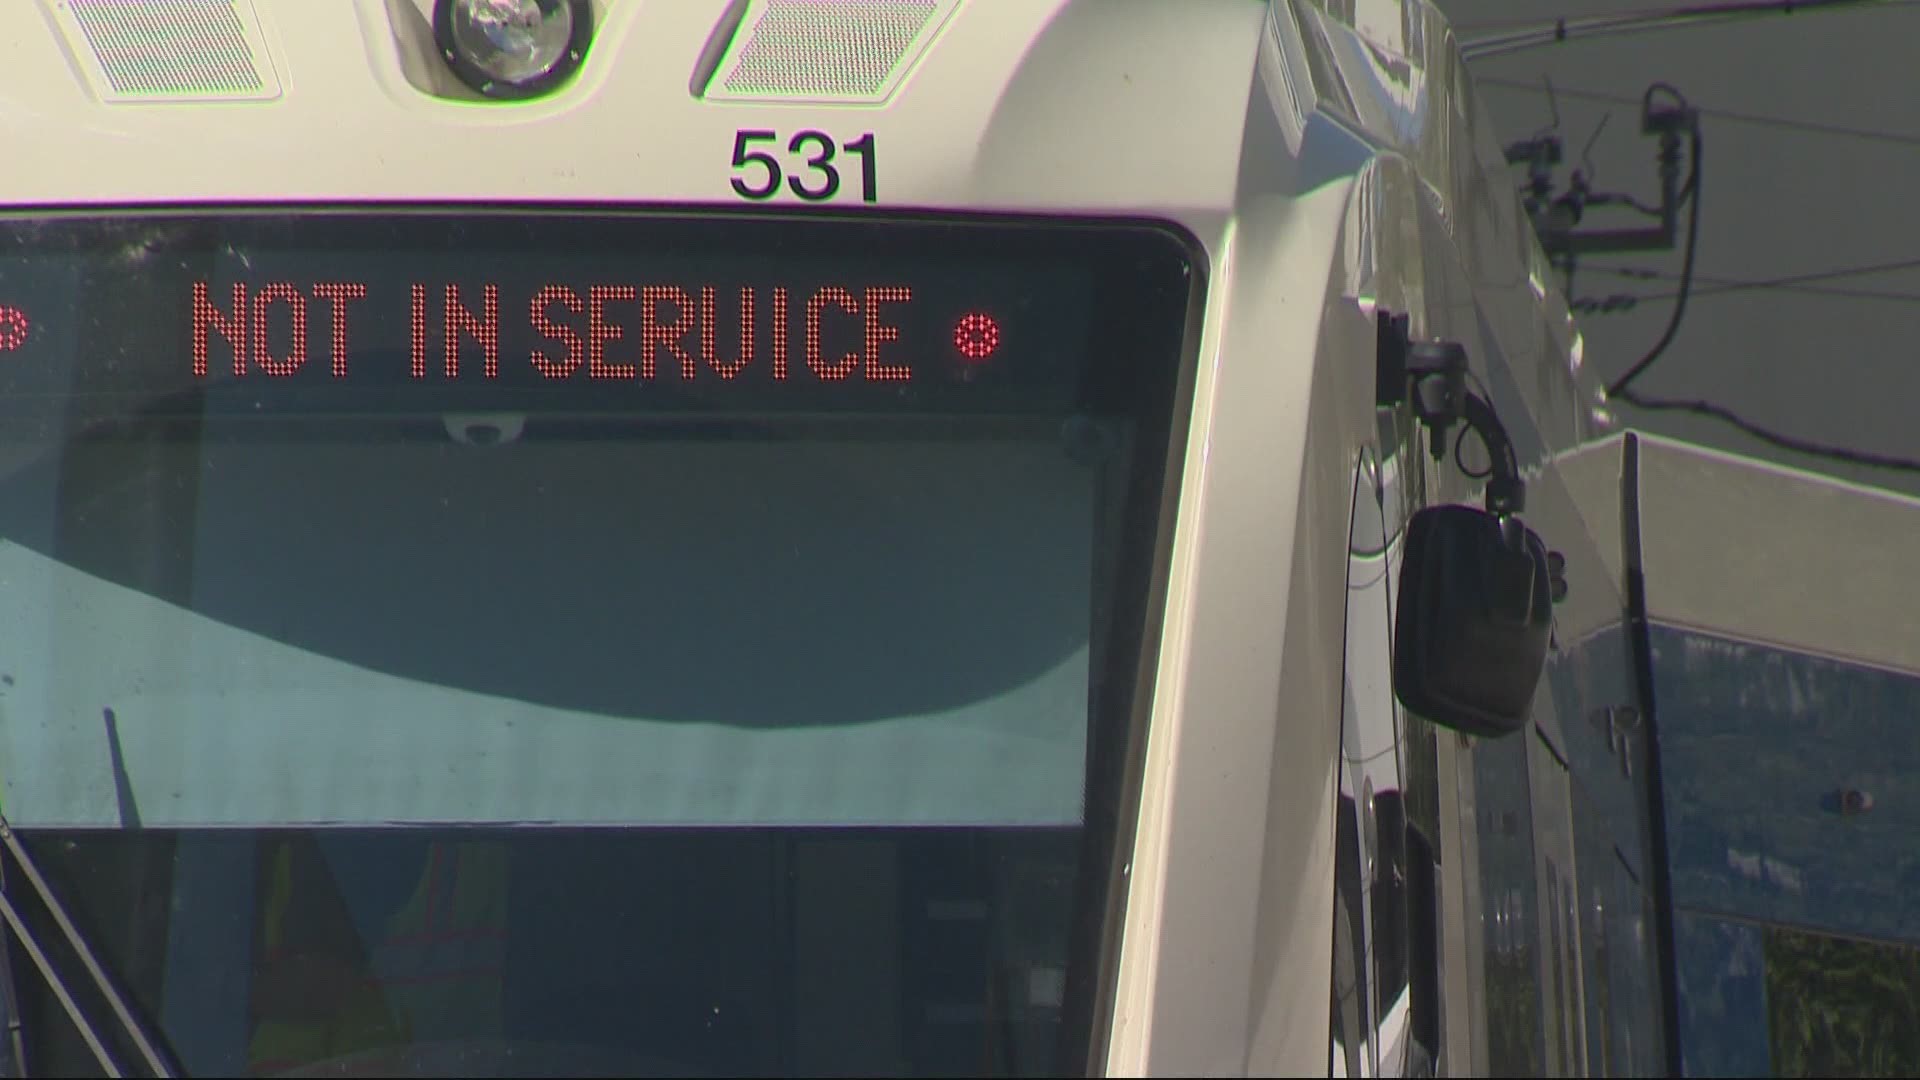 The closure is due to a damaged overhead wire near the Sunset Transit Center that could take days to repair. Katherine Cook reports.